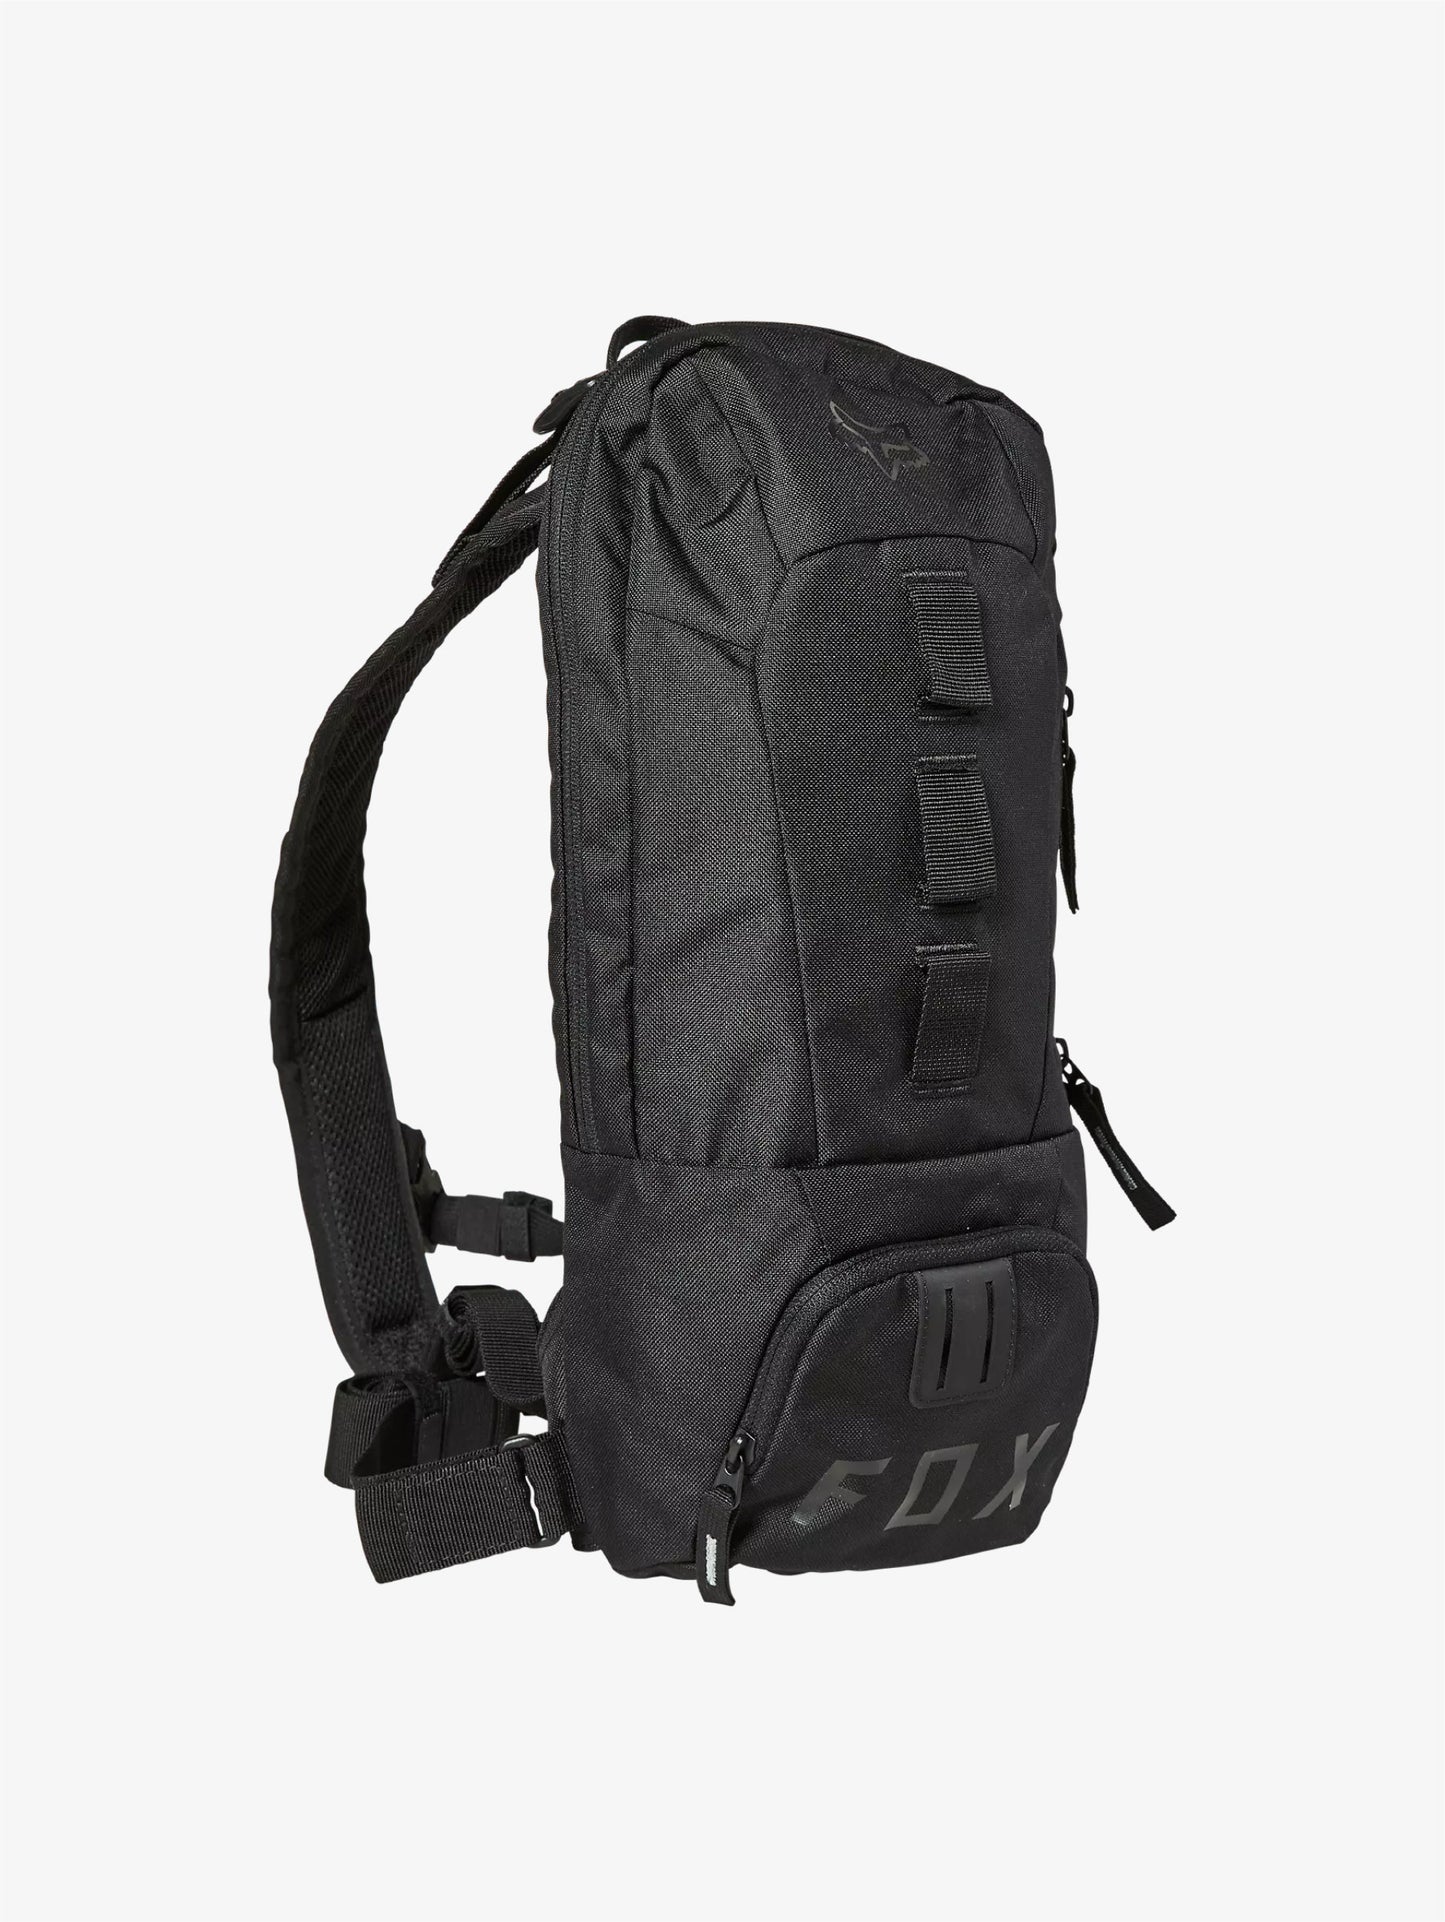 Utility 6L Hydration Pack backpack black